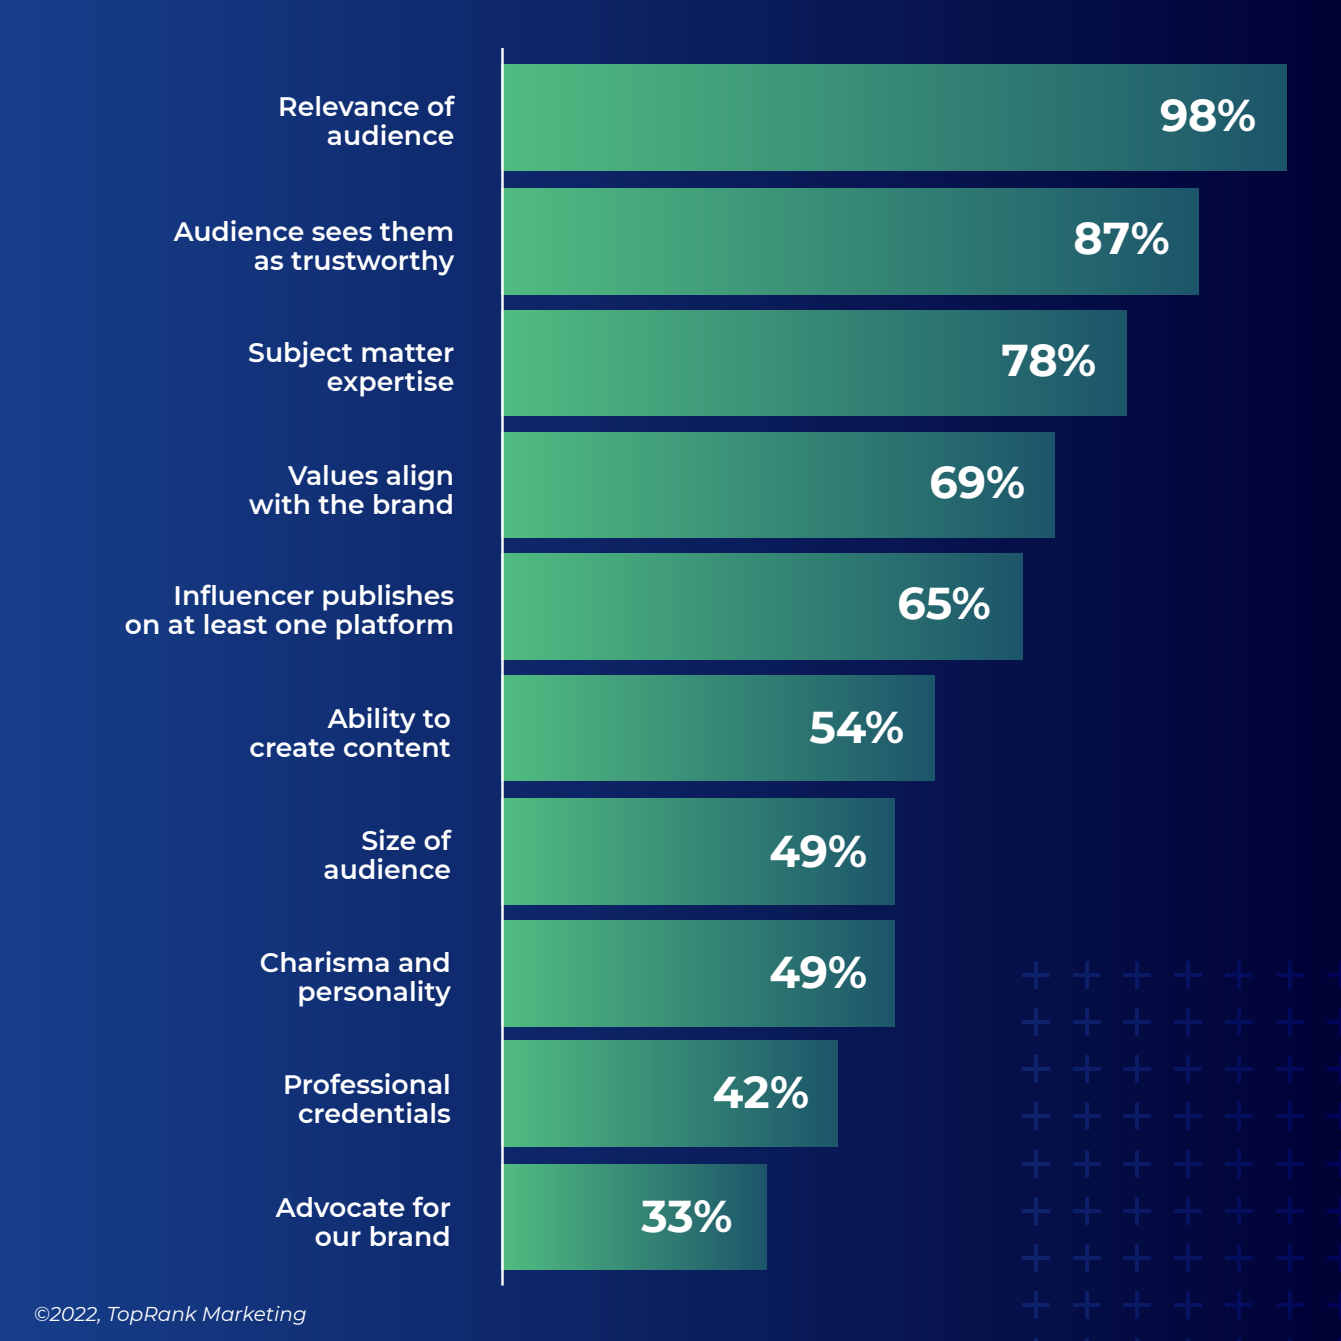 What You Need to Know About the 2022 B2B Influencer Marketing Research Report